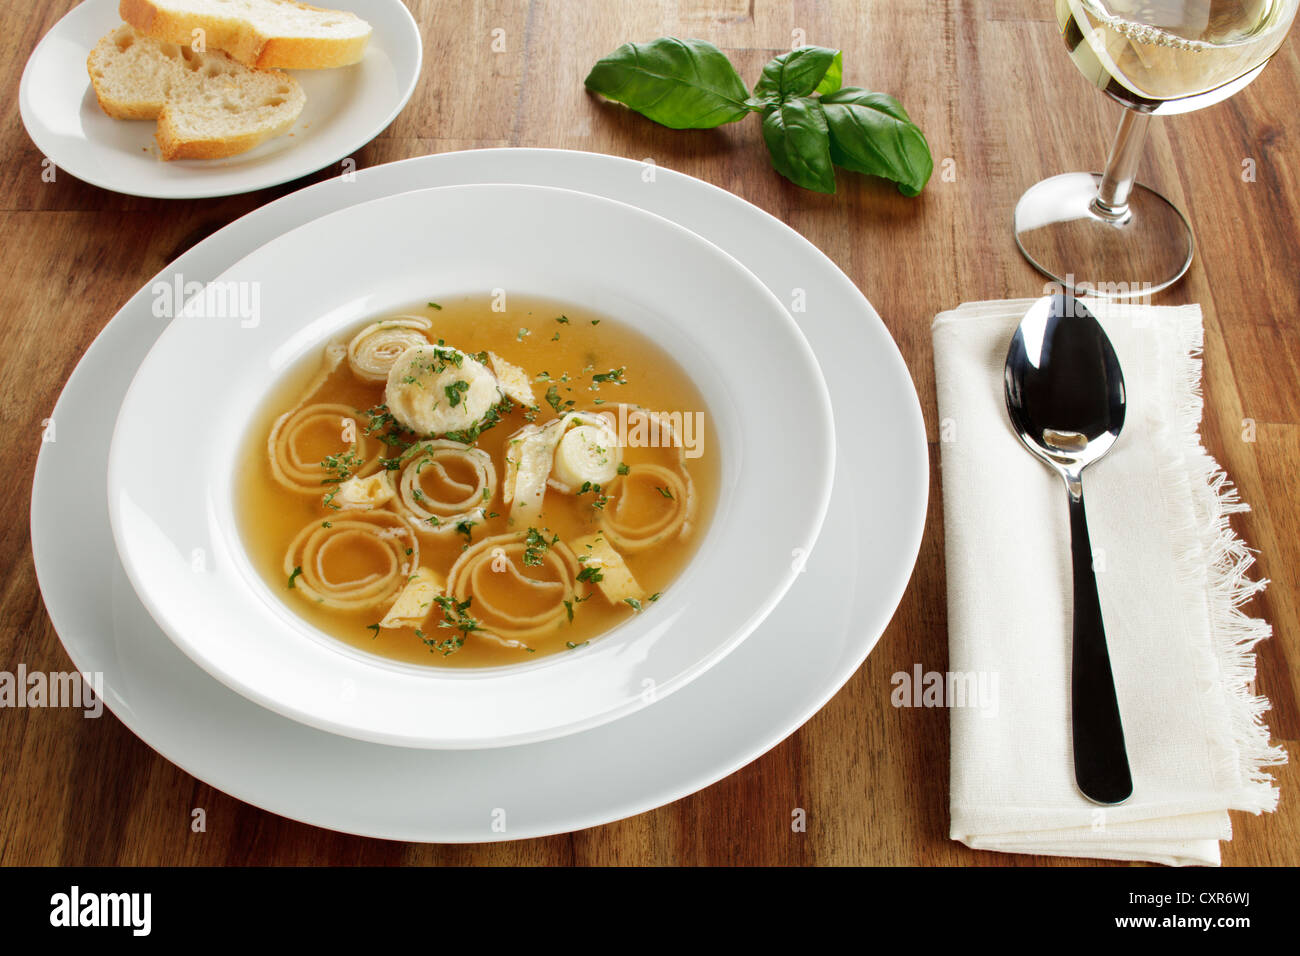 Wedding soup, beef stock with dumplings, sliced pancakes and egg served with white bread and white wine Stock Photo